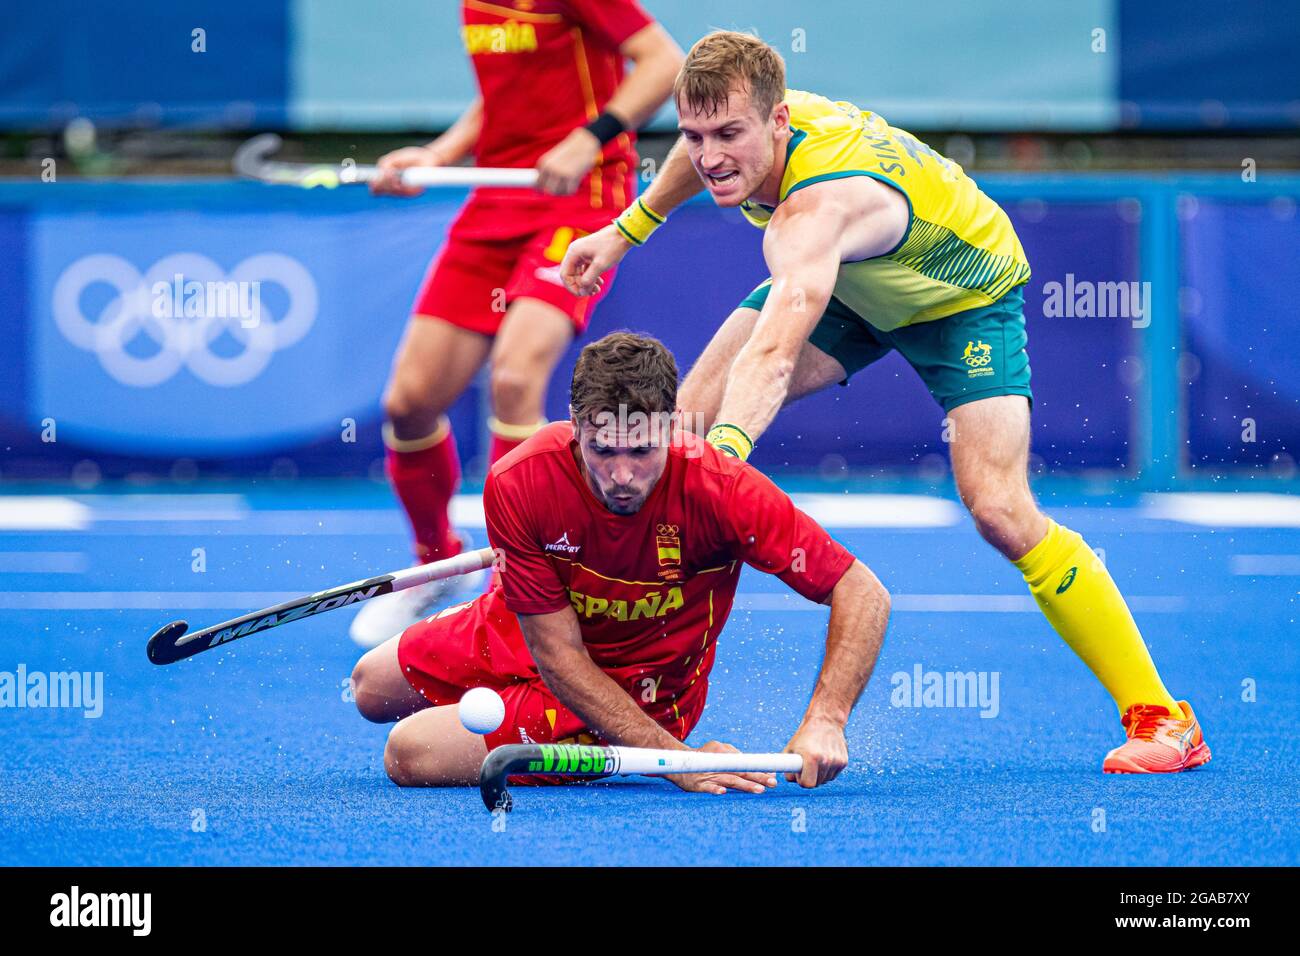 Tokyo, Japan. 30th July, 2021. Olympic Games: Hockey match between Spain v Australia. Credit: ABEL F. ROS/Alamy Live News Stock Photo